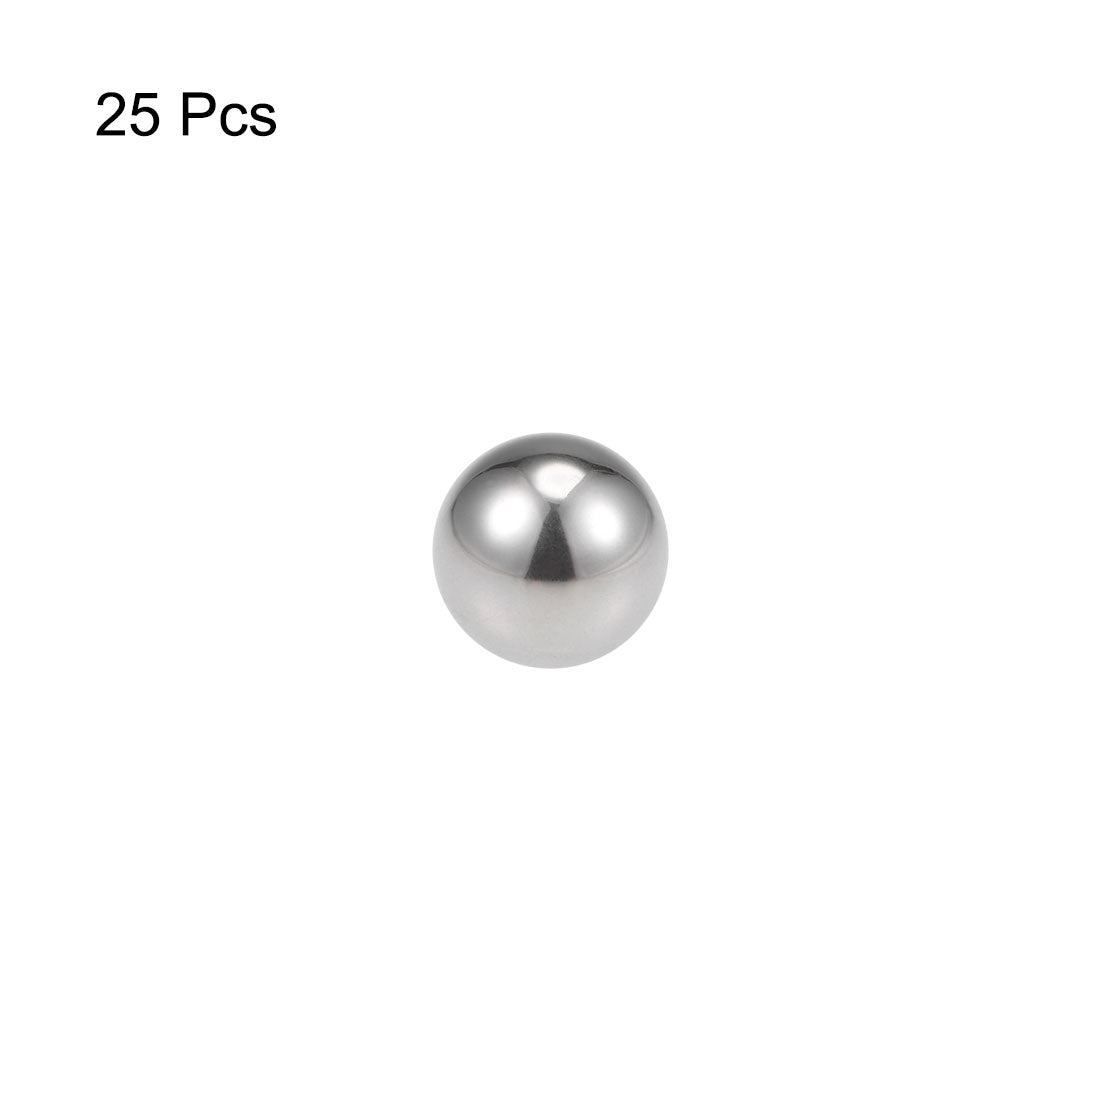 Uxcell Uxcell 3/8" Bearing Balls 440C Stainless Steel G25 Precision Balls 25pcs